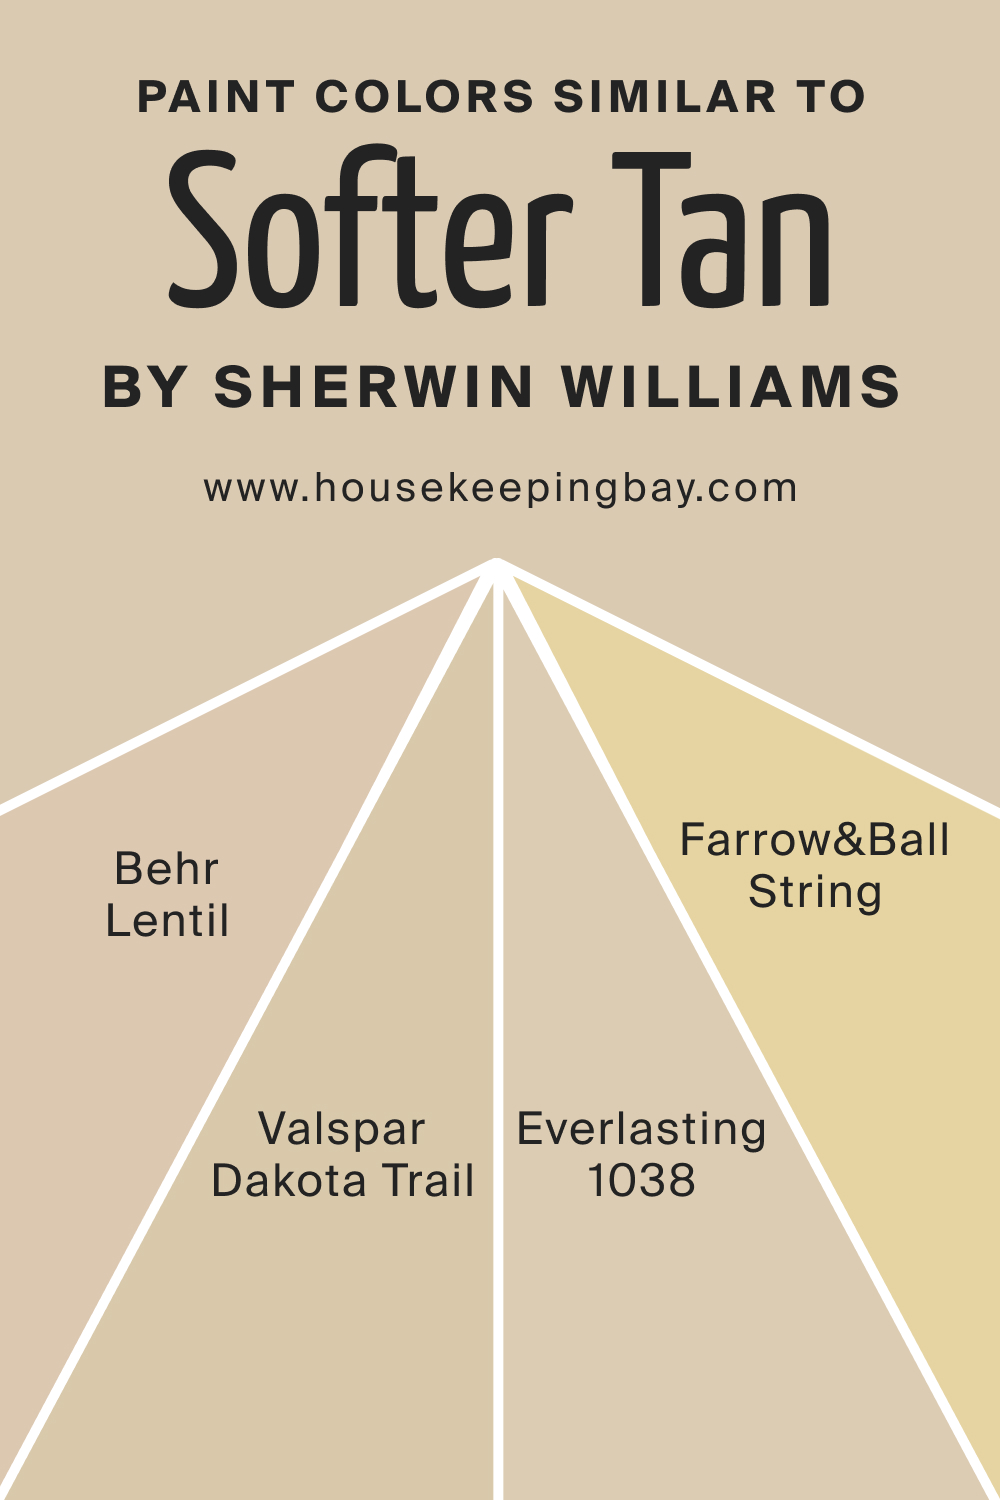 Paint Colors Similar to SW Softer Tan by Sherwin Williams